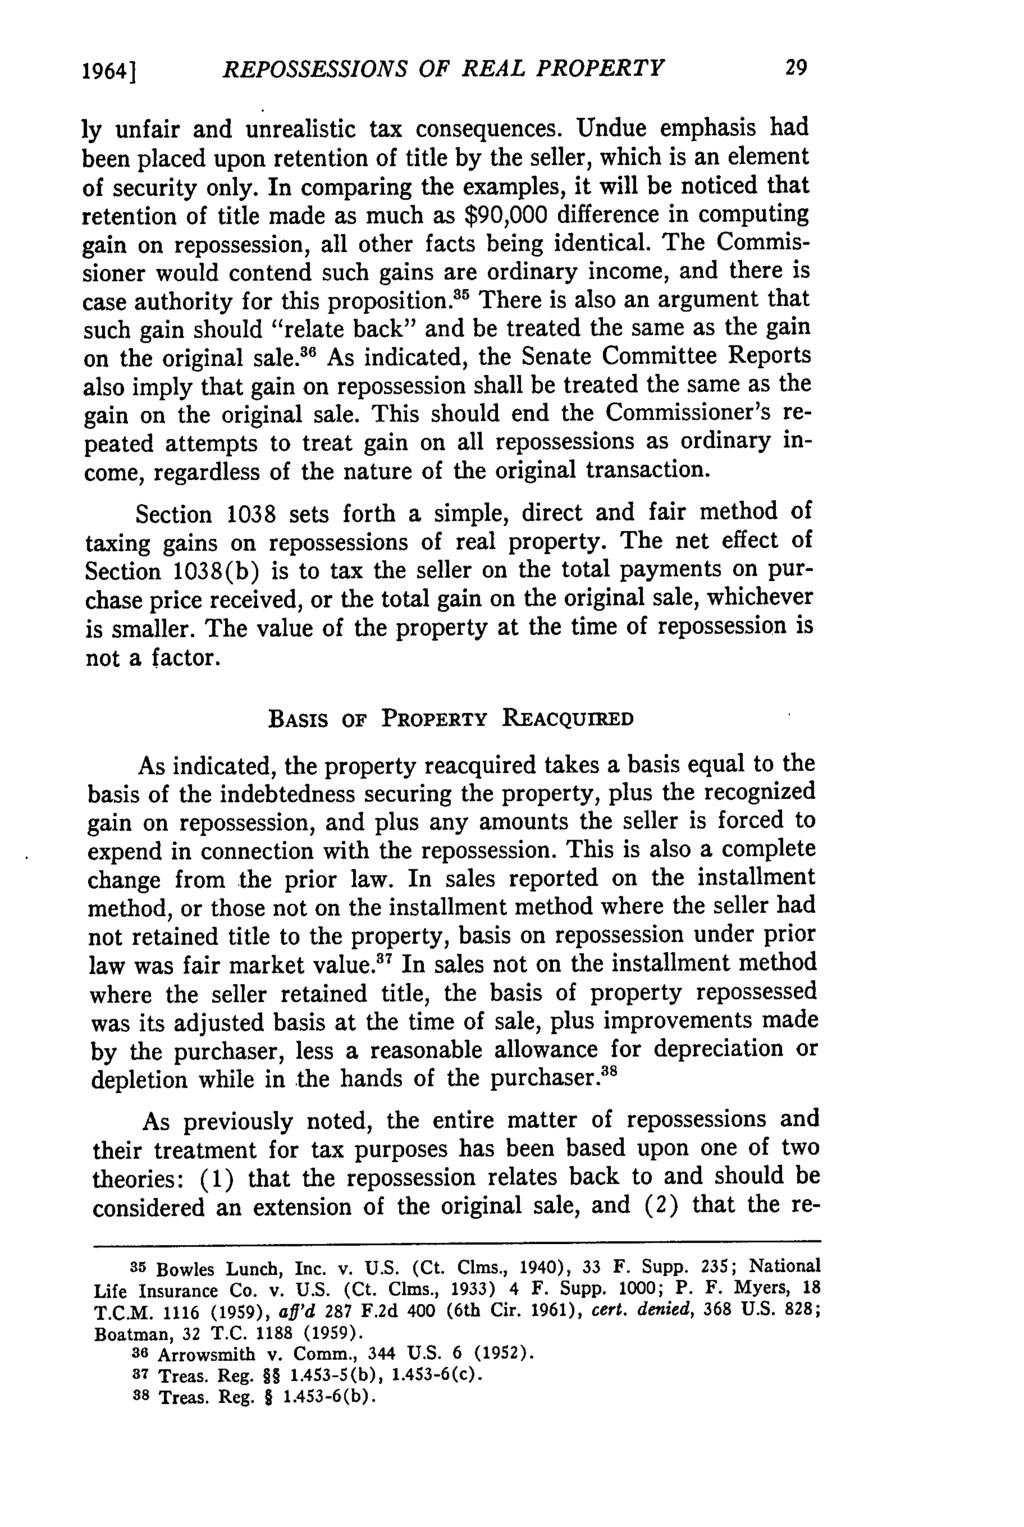 1964] REPOSSESSIONS OF REAL PROPERTY ly unfair and unrealistic tax consequences. Undue emphasis had been placed upon retention of title by the seller, which is an element of security only.